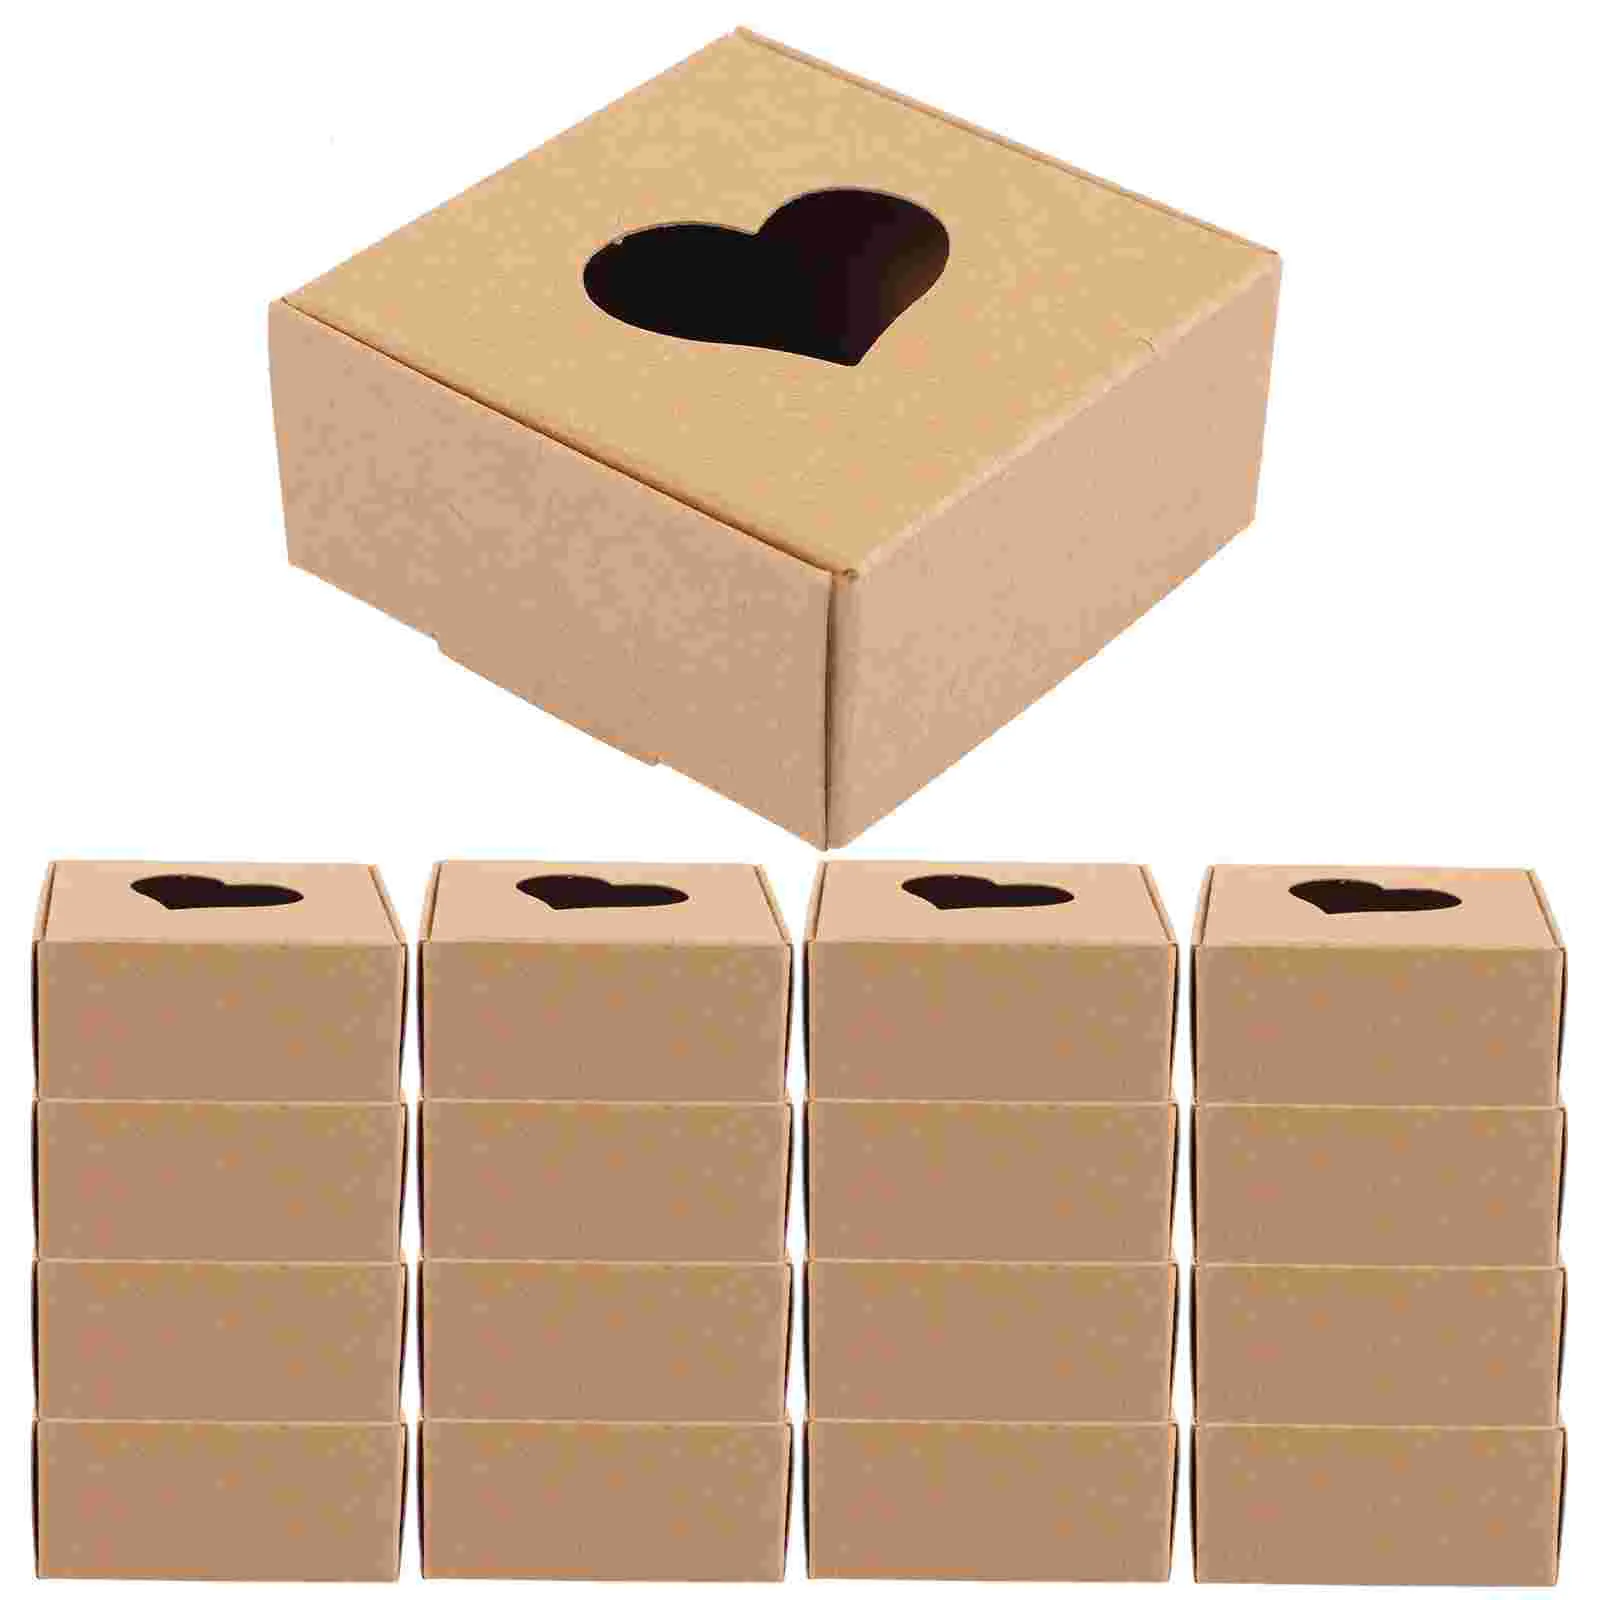 

Boxes Gift Box Kraft Packaging Paper Soap Mini Cardboard Homemade Cake Heart Treat Paperboard Jewelry Package Present Wrapping